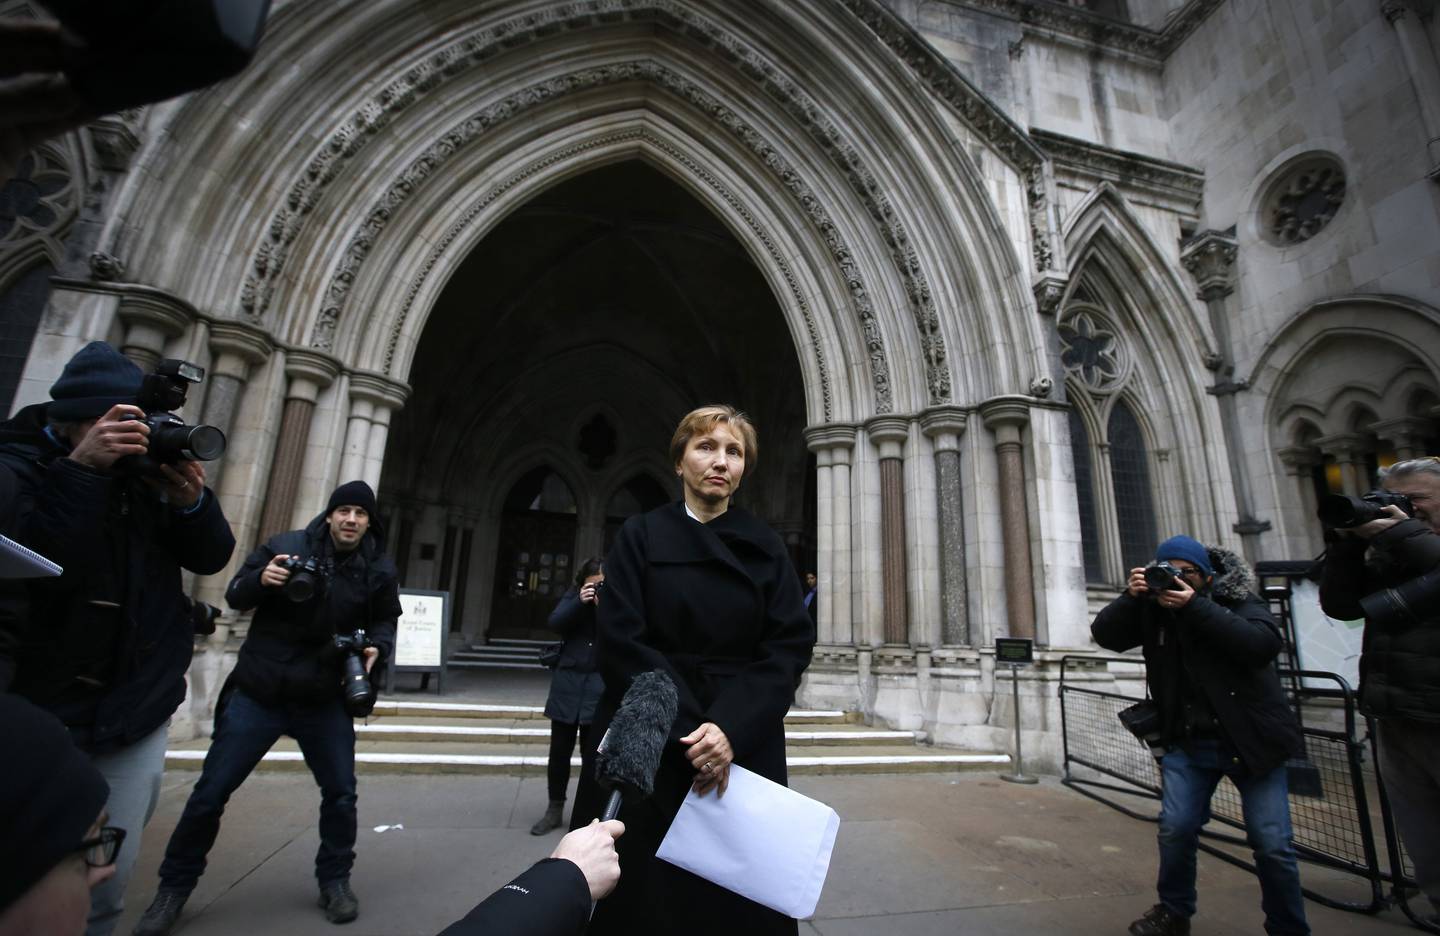 FILE - In this Thursday, Jan. 21, 2016 file photo, Marina Litvinenko, widow of former Russian spy Alexander Litvinenko, reads a statement outside the Royal Courts of Justice in London.  The European Court of Human Rights on Tuesday, Sept. 21, 2021 backed the conclusion of a British inquiry that Russia was responsible for the killing of Alexander Litvinenko, who died in 2006 after drinking tea laced with a radioactive material. A former agent for the KGB and the post-Soviet successor agency FSB, Col. Alexander Litvinenko defected from Russia in 2000 and fled to London. He fell violently ill on Nov. 1, 2006, after drinking tea with two Russian men at a London hotel, and spent three weeks in hospital before he died. His tea was found to have been laced with radioactive polonium-210. (AP Photo/Kirsty Wigglesworth, File)